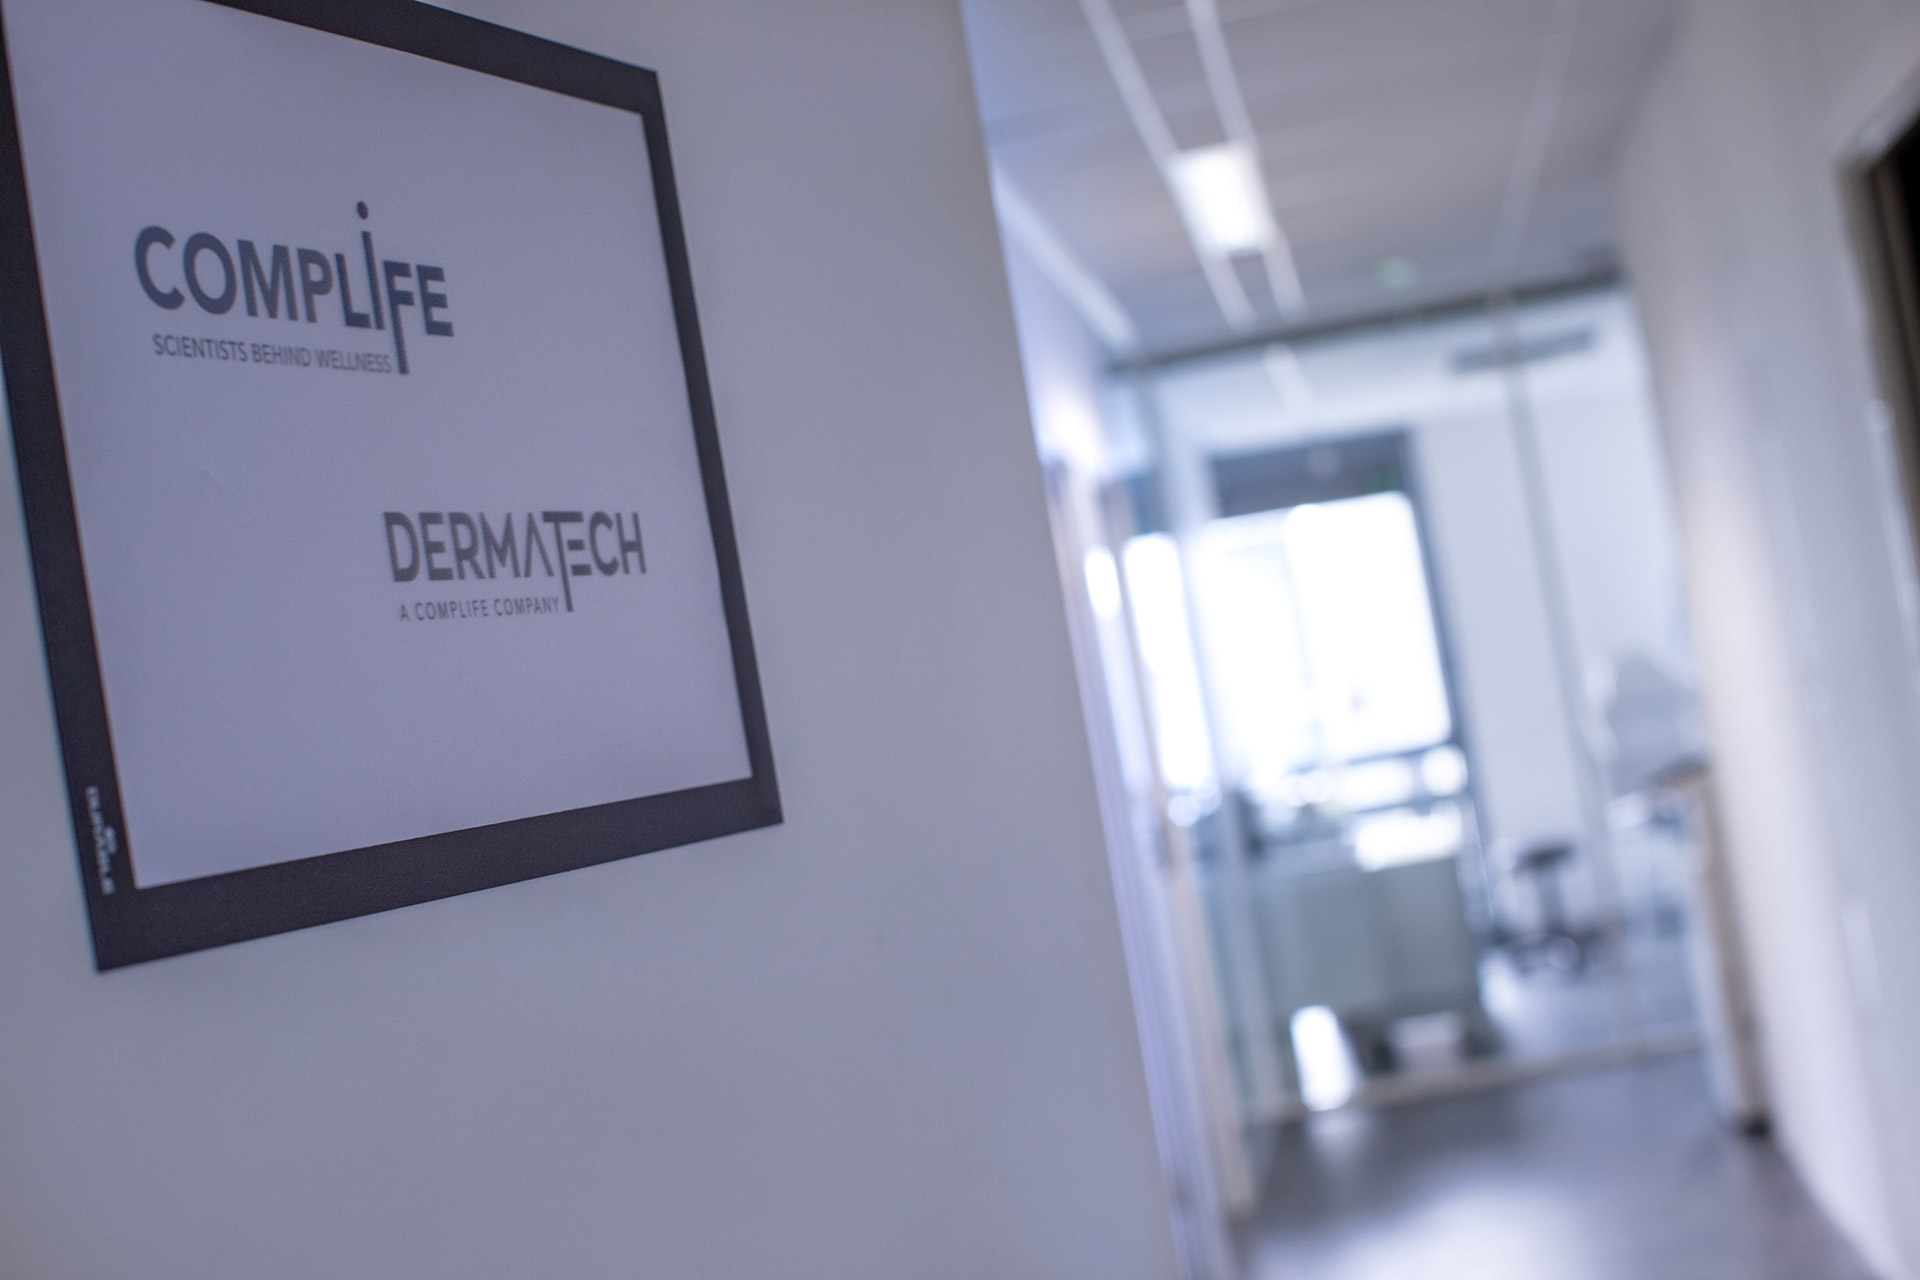 Dermatech and Complife offices in Lyon’s 8th arrondissement (France)